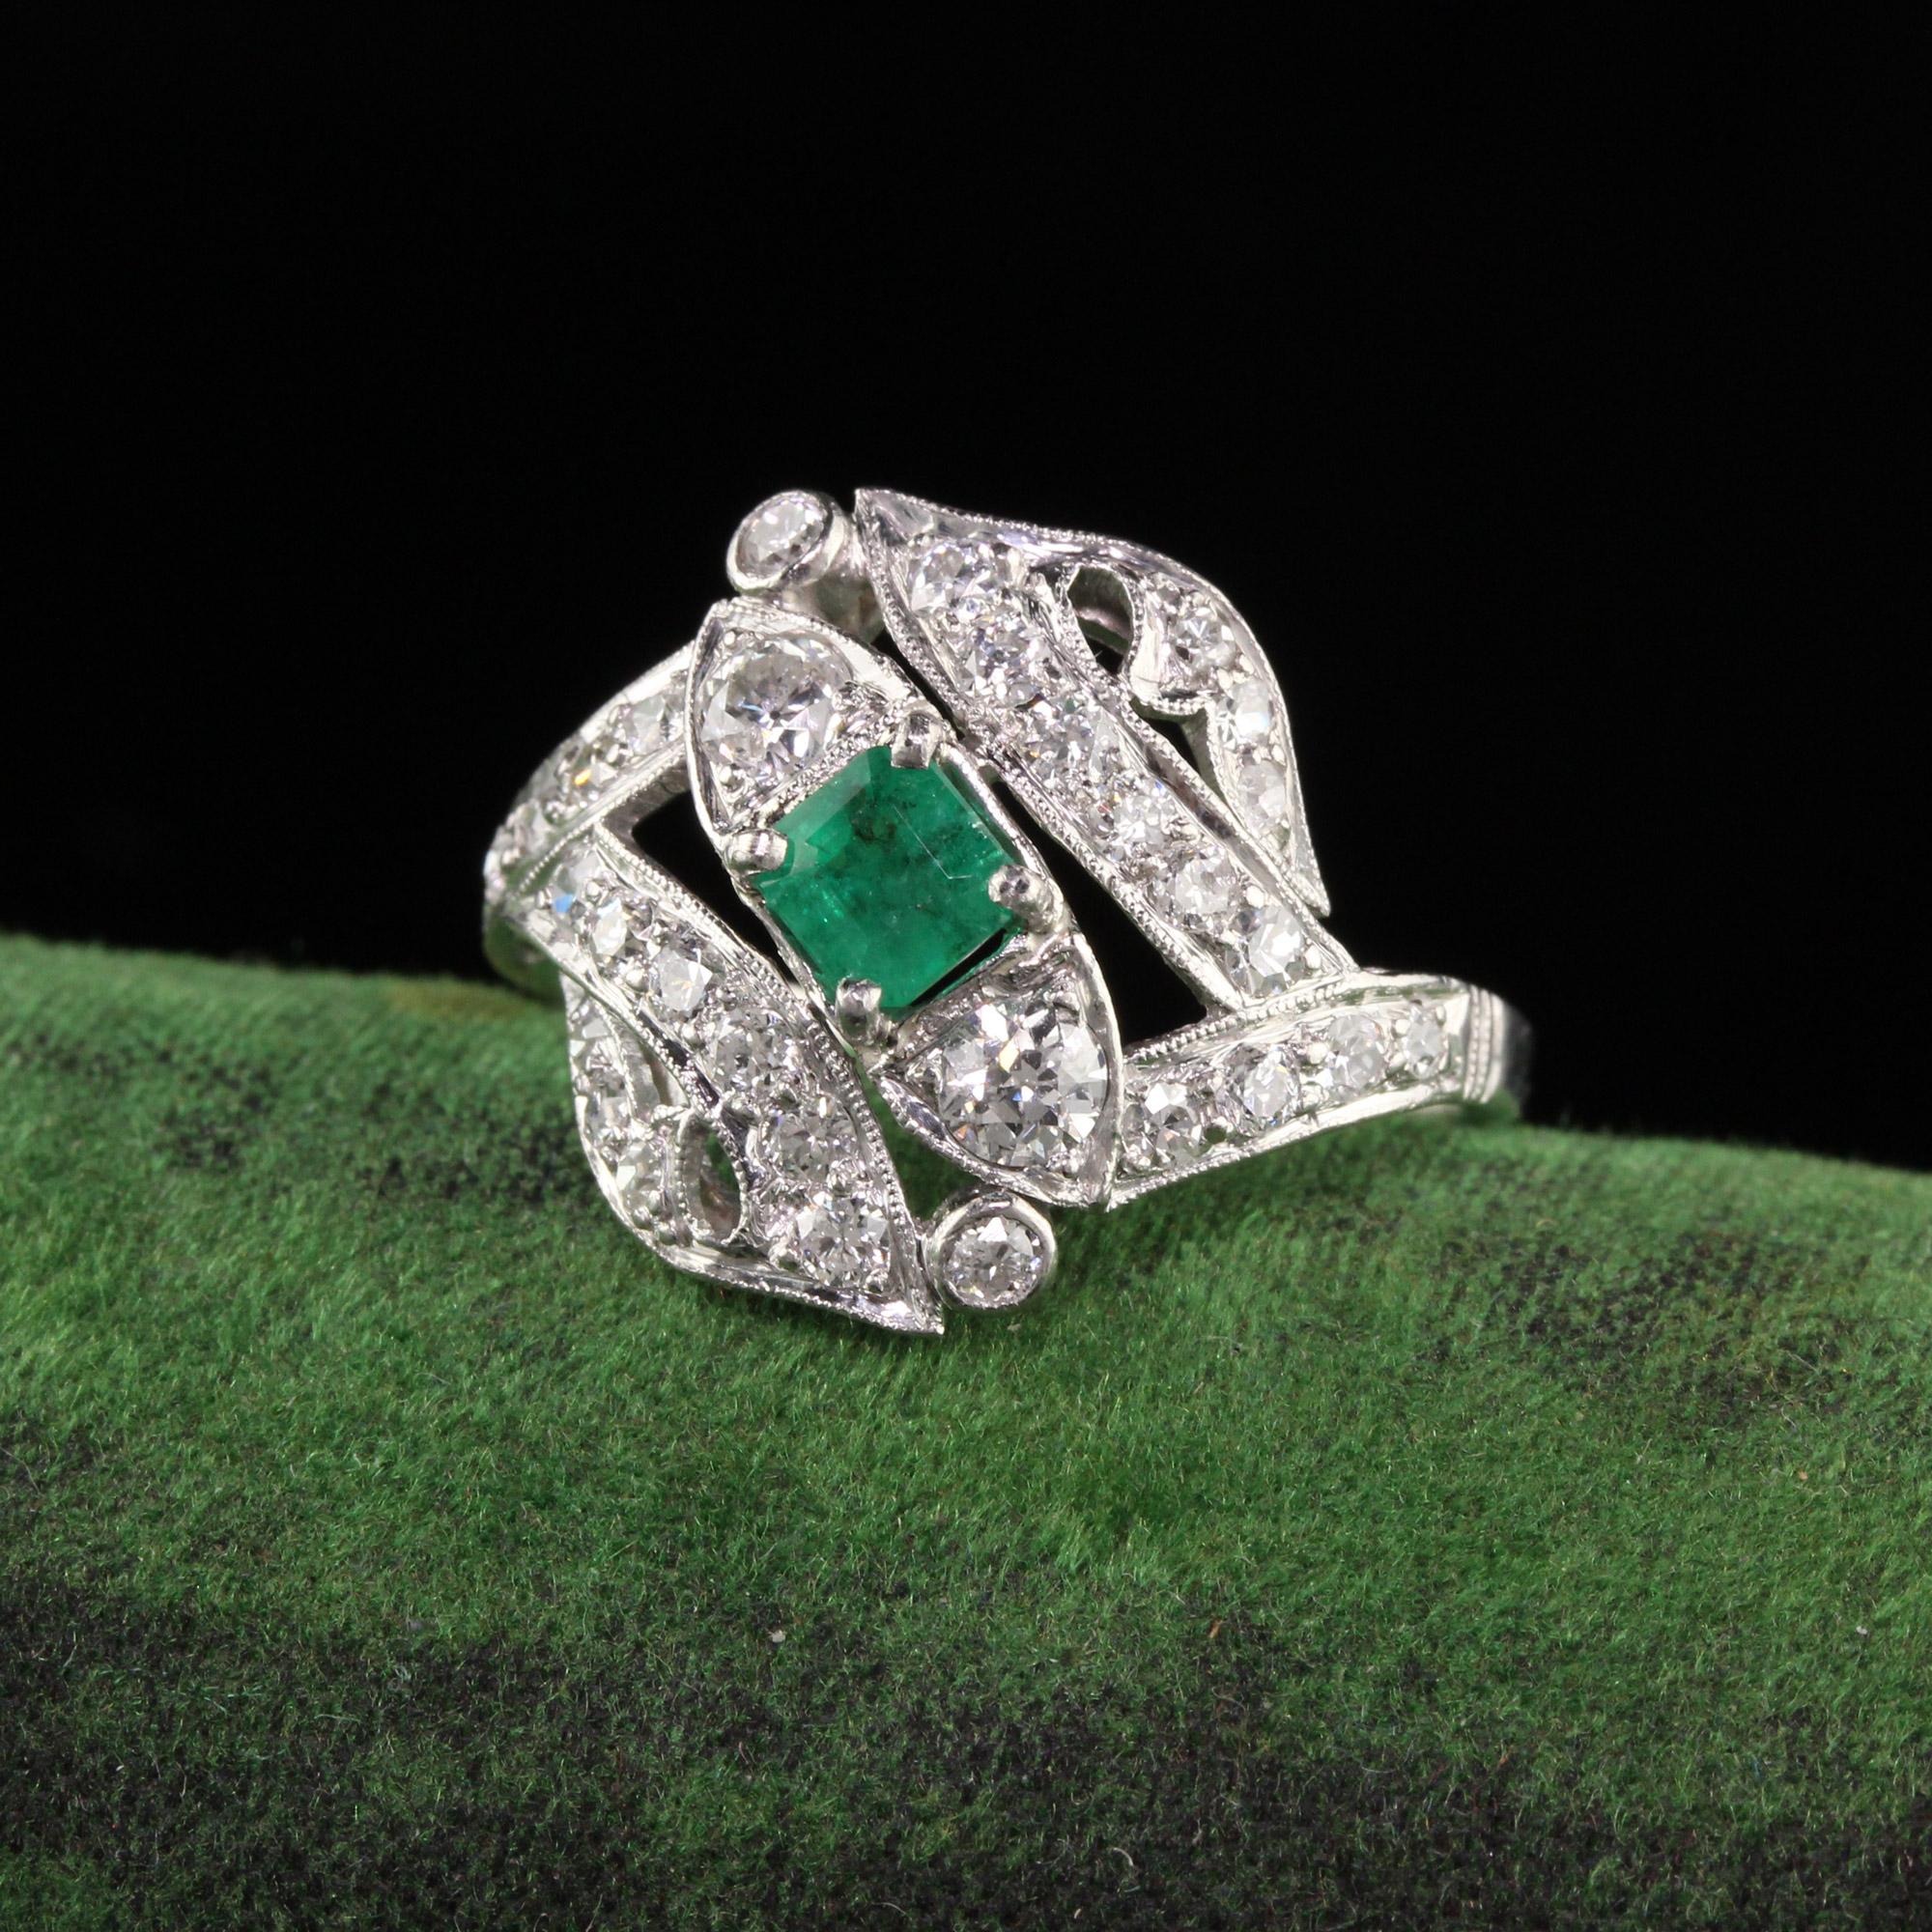 Beautiful Antique Art Deco Platinum Emerald Old European Diamond Statement Ring. This beautiful ring has old european cut diamonds all over the top of the ring with a green emerald in the center.

Item #R1047

Metal: Platinum

Weight: 5.2